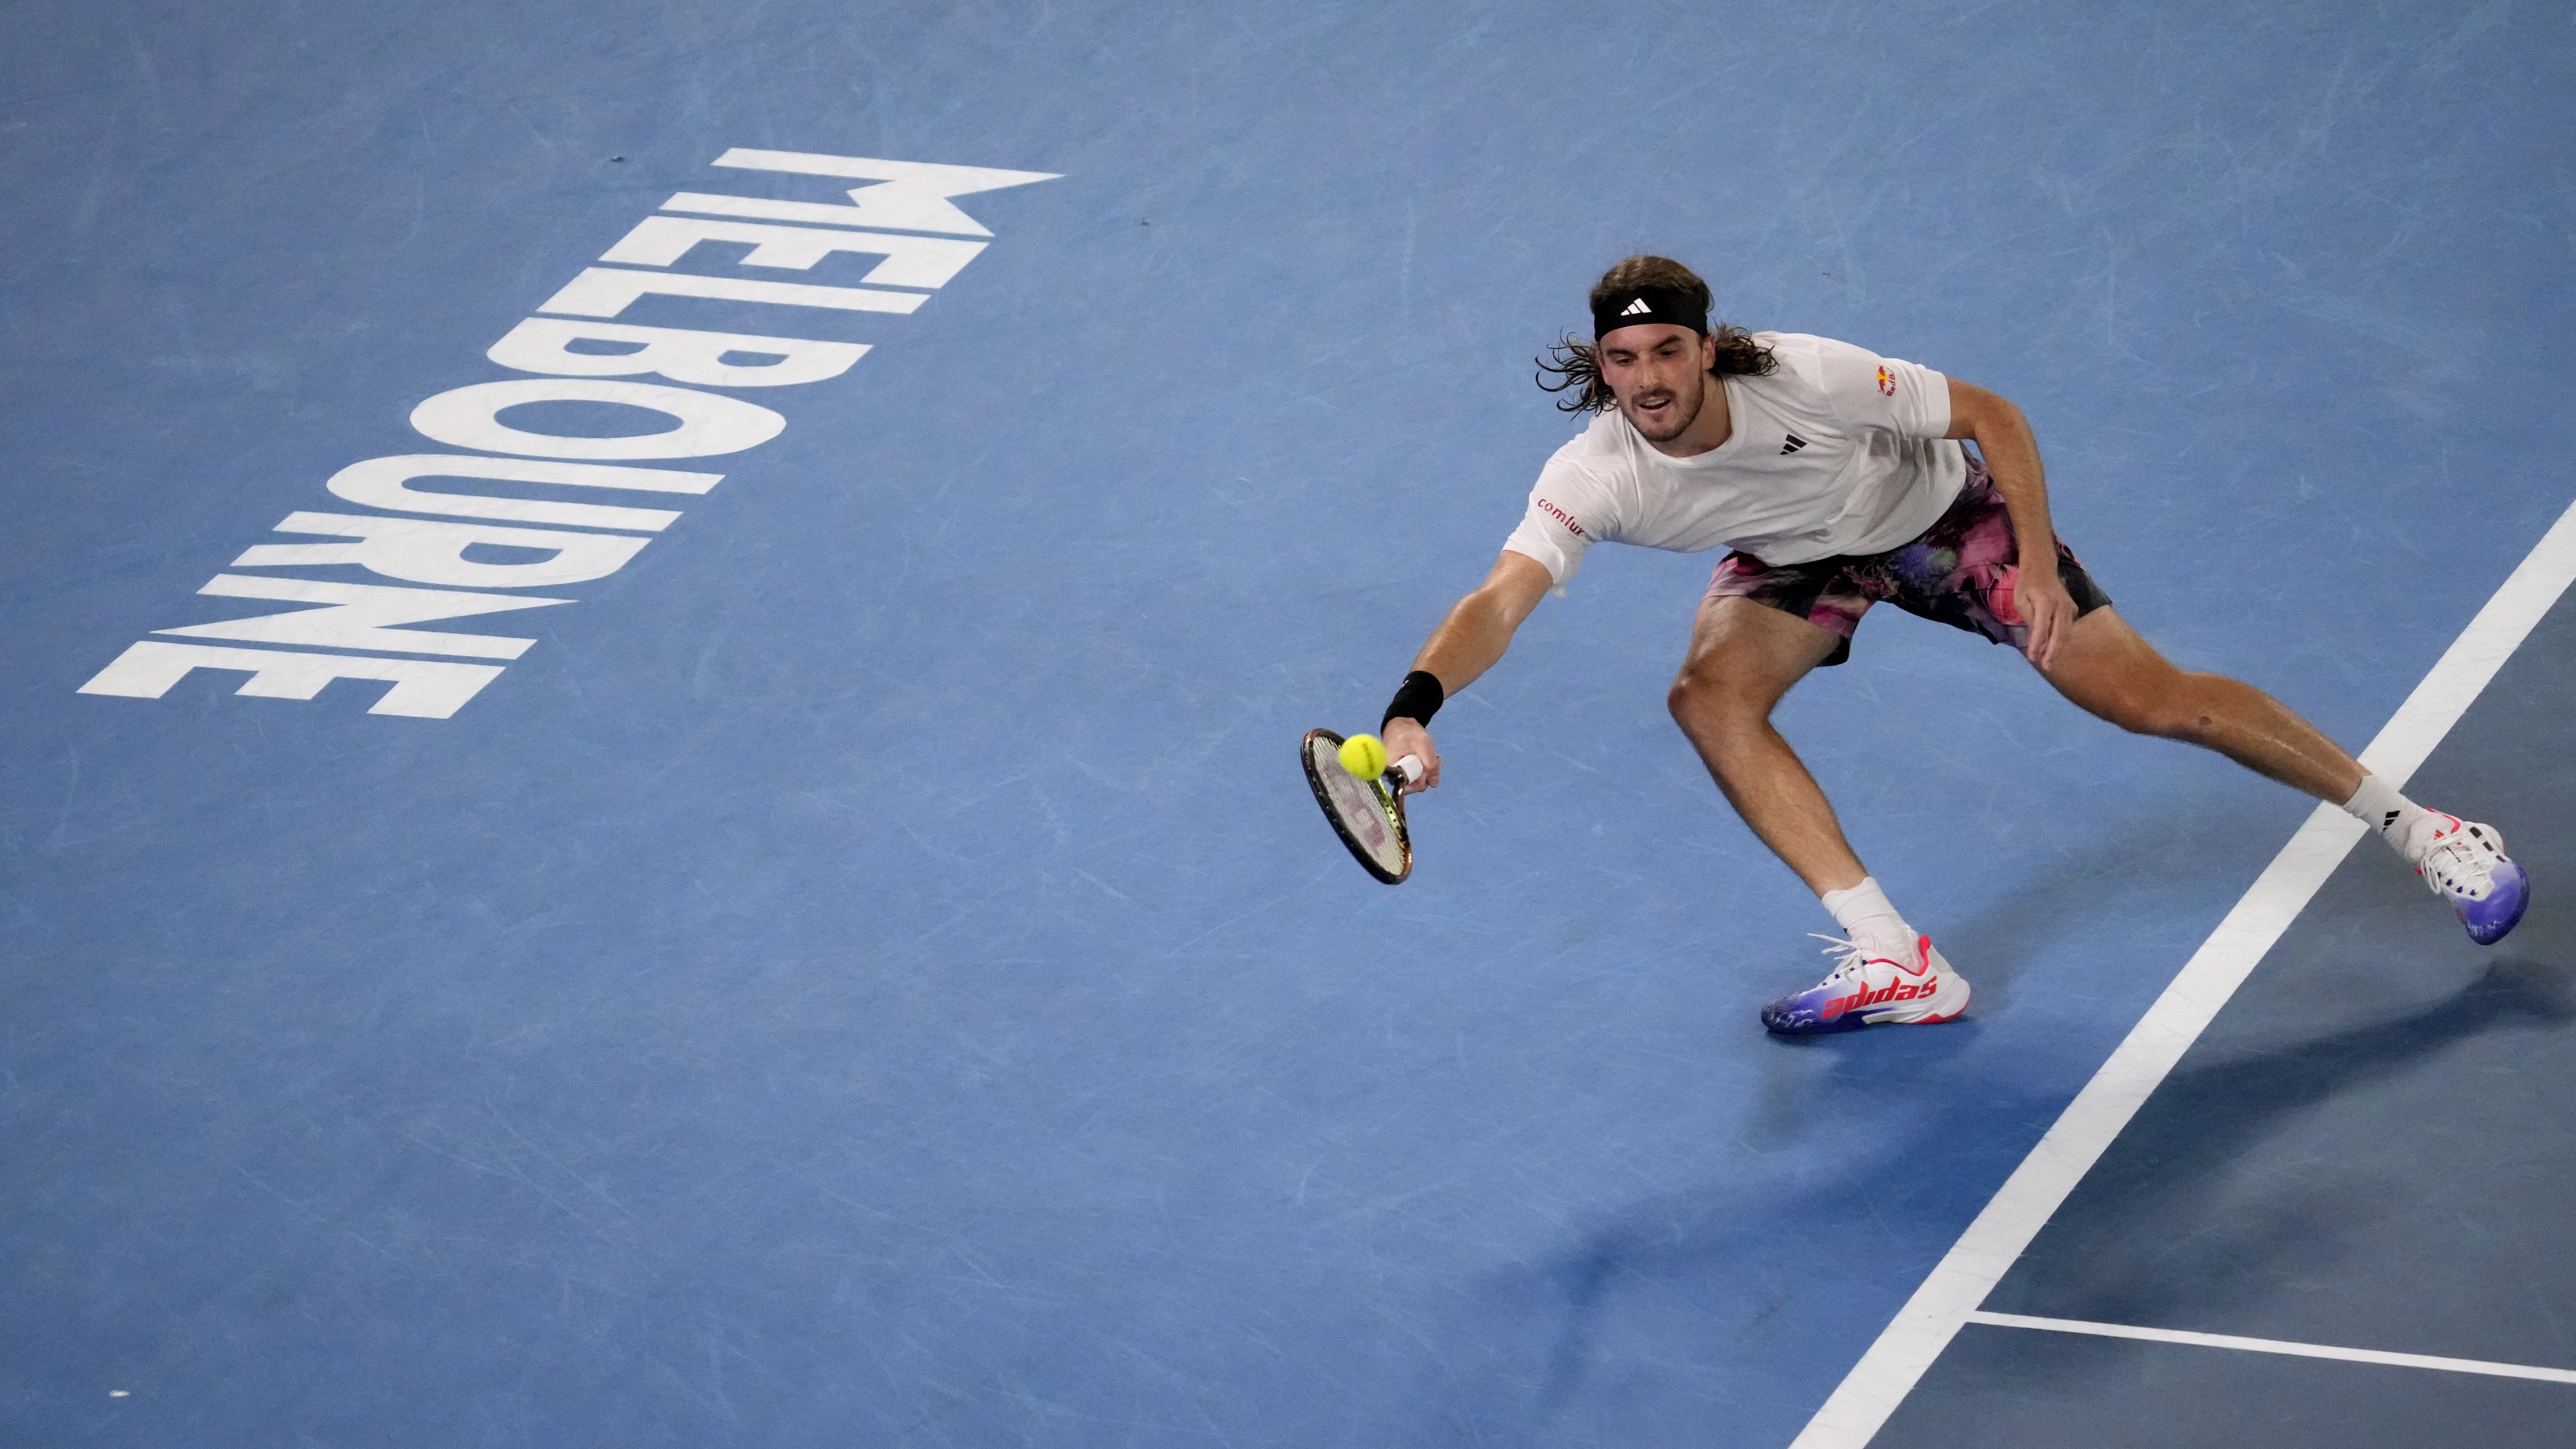 How to Watch the Mens Semifinals at the Australian Open Channel, Stream, Start Times, Preview